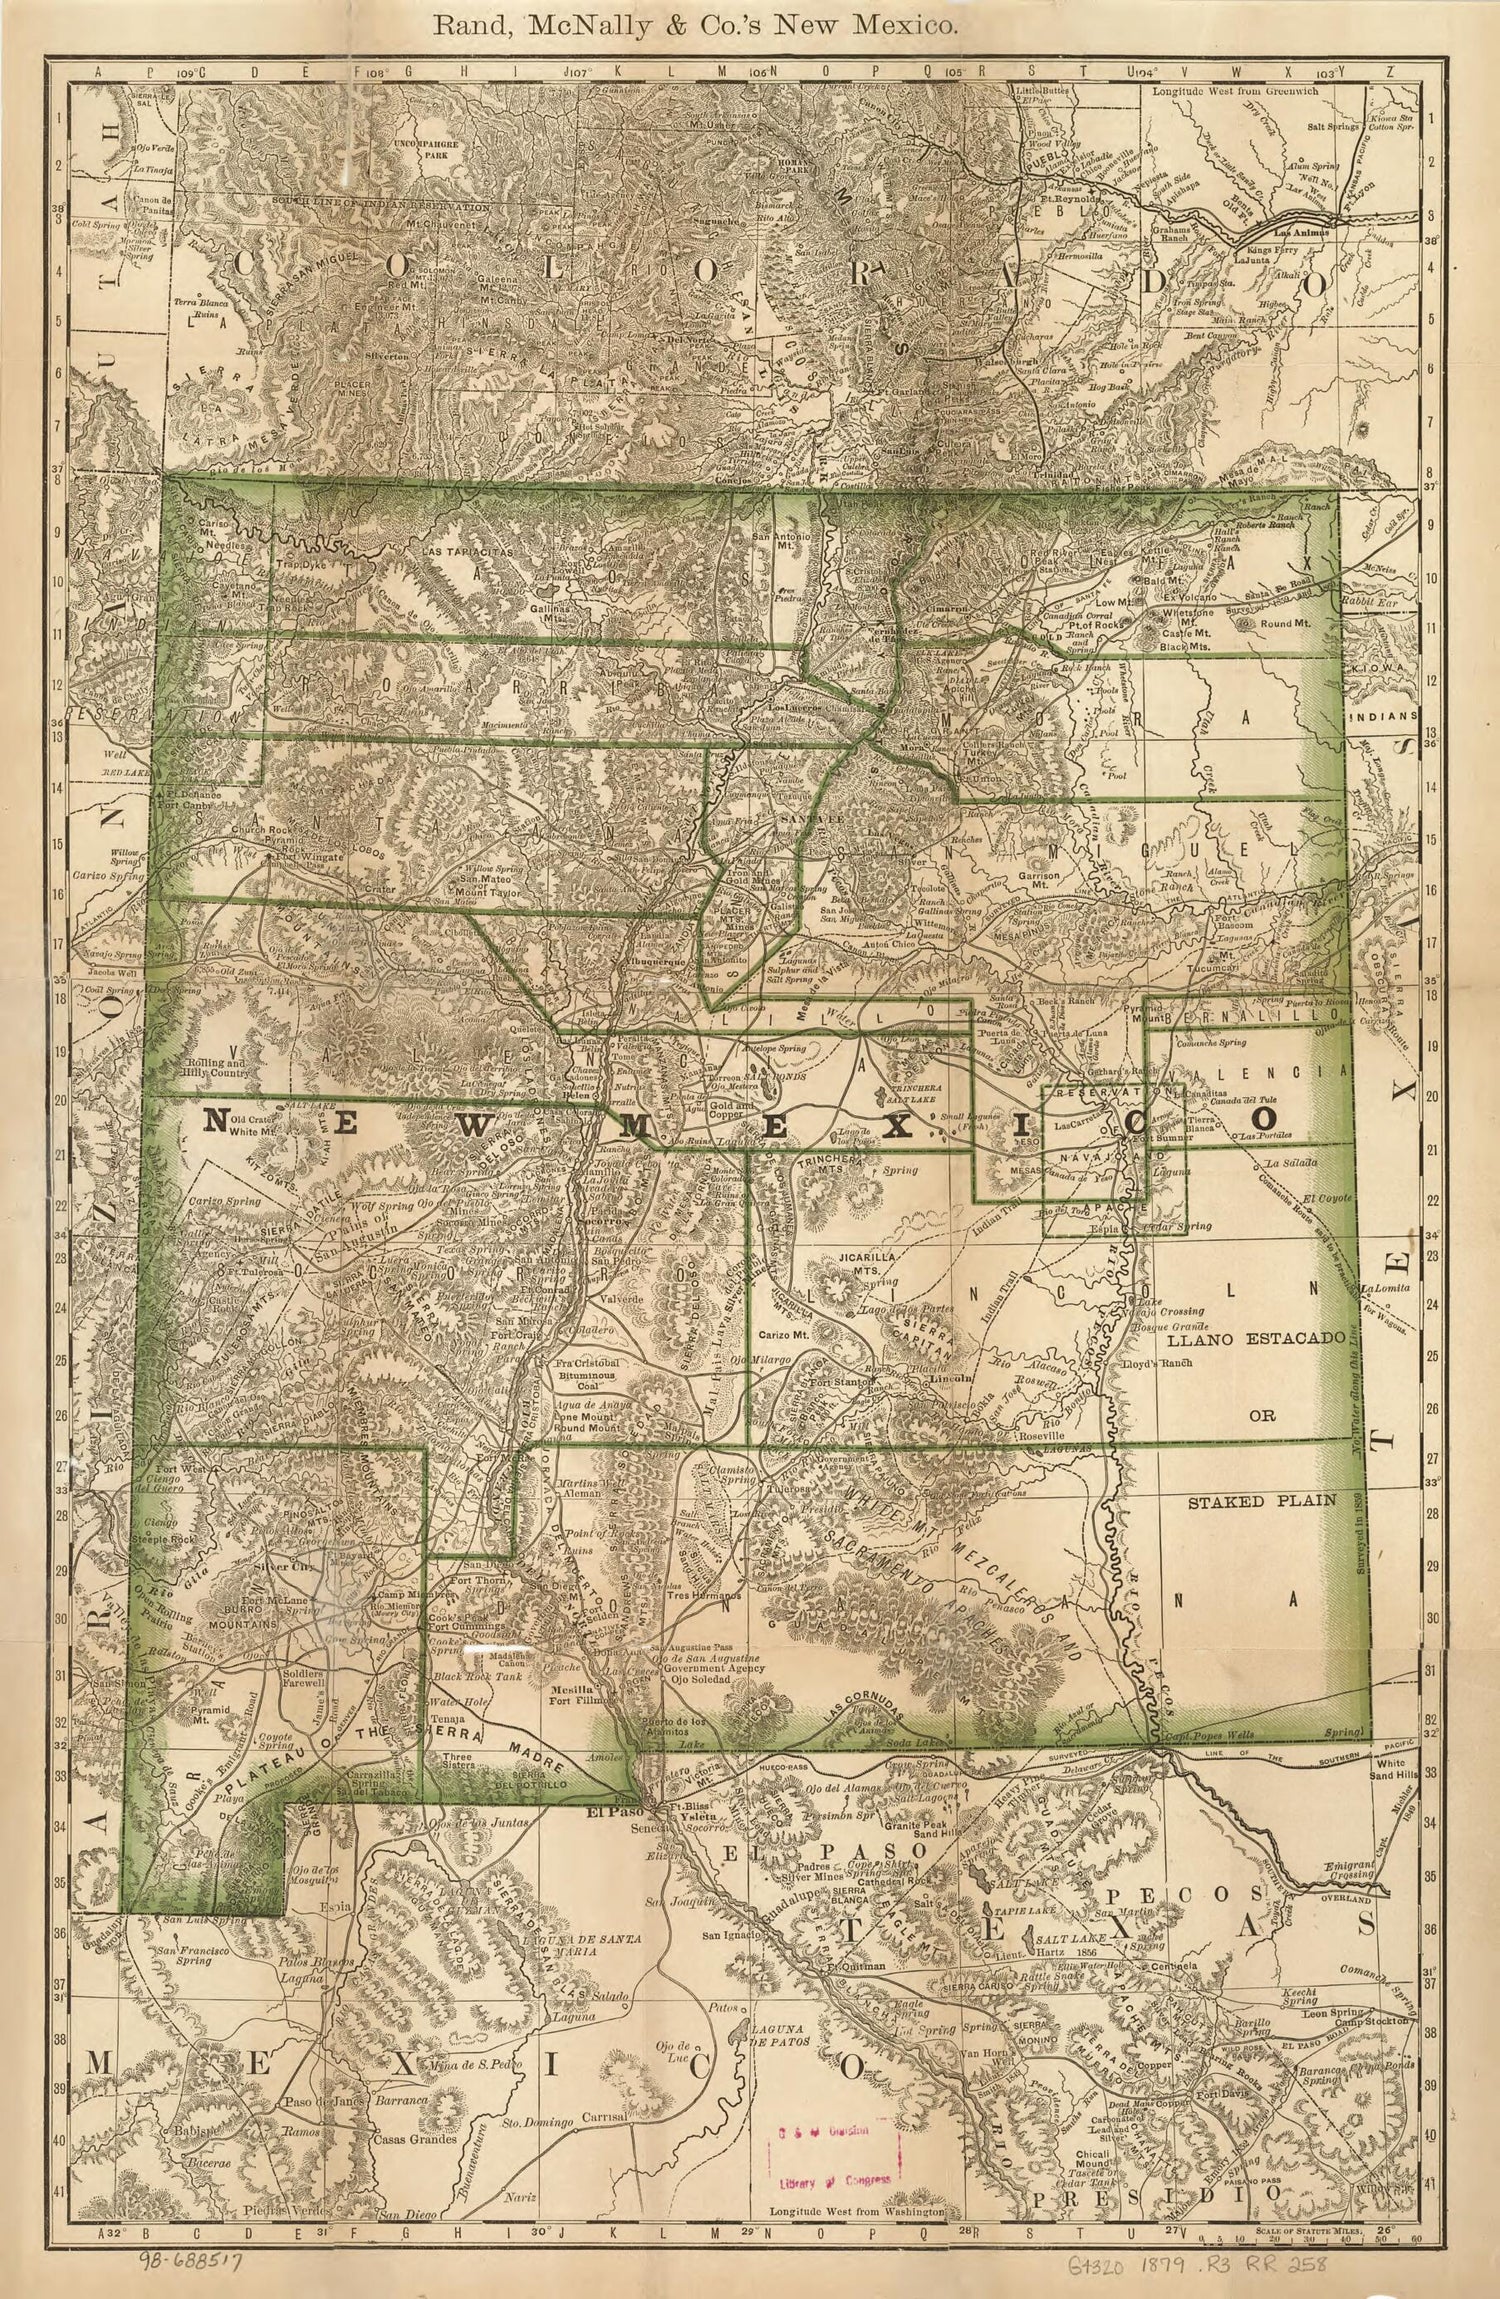 This old map of Indexed Map of New Mexico Showing Stage Lines, Counties Lake &amp; Rivers from 1879 was created by  Rand McNally and Company in 1879